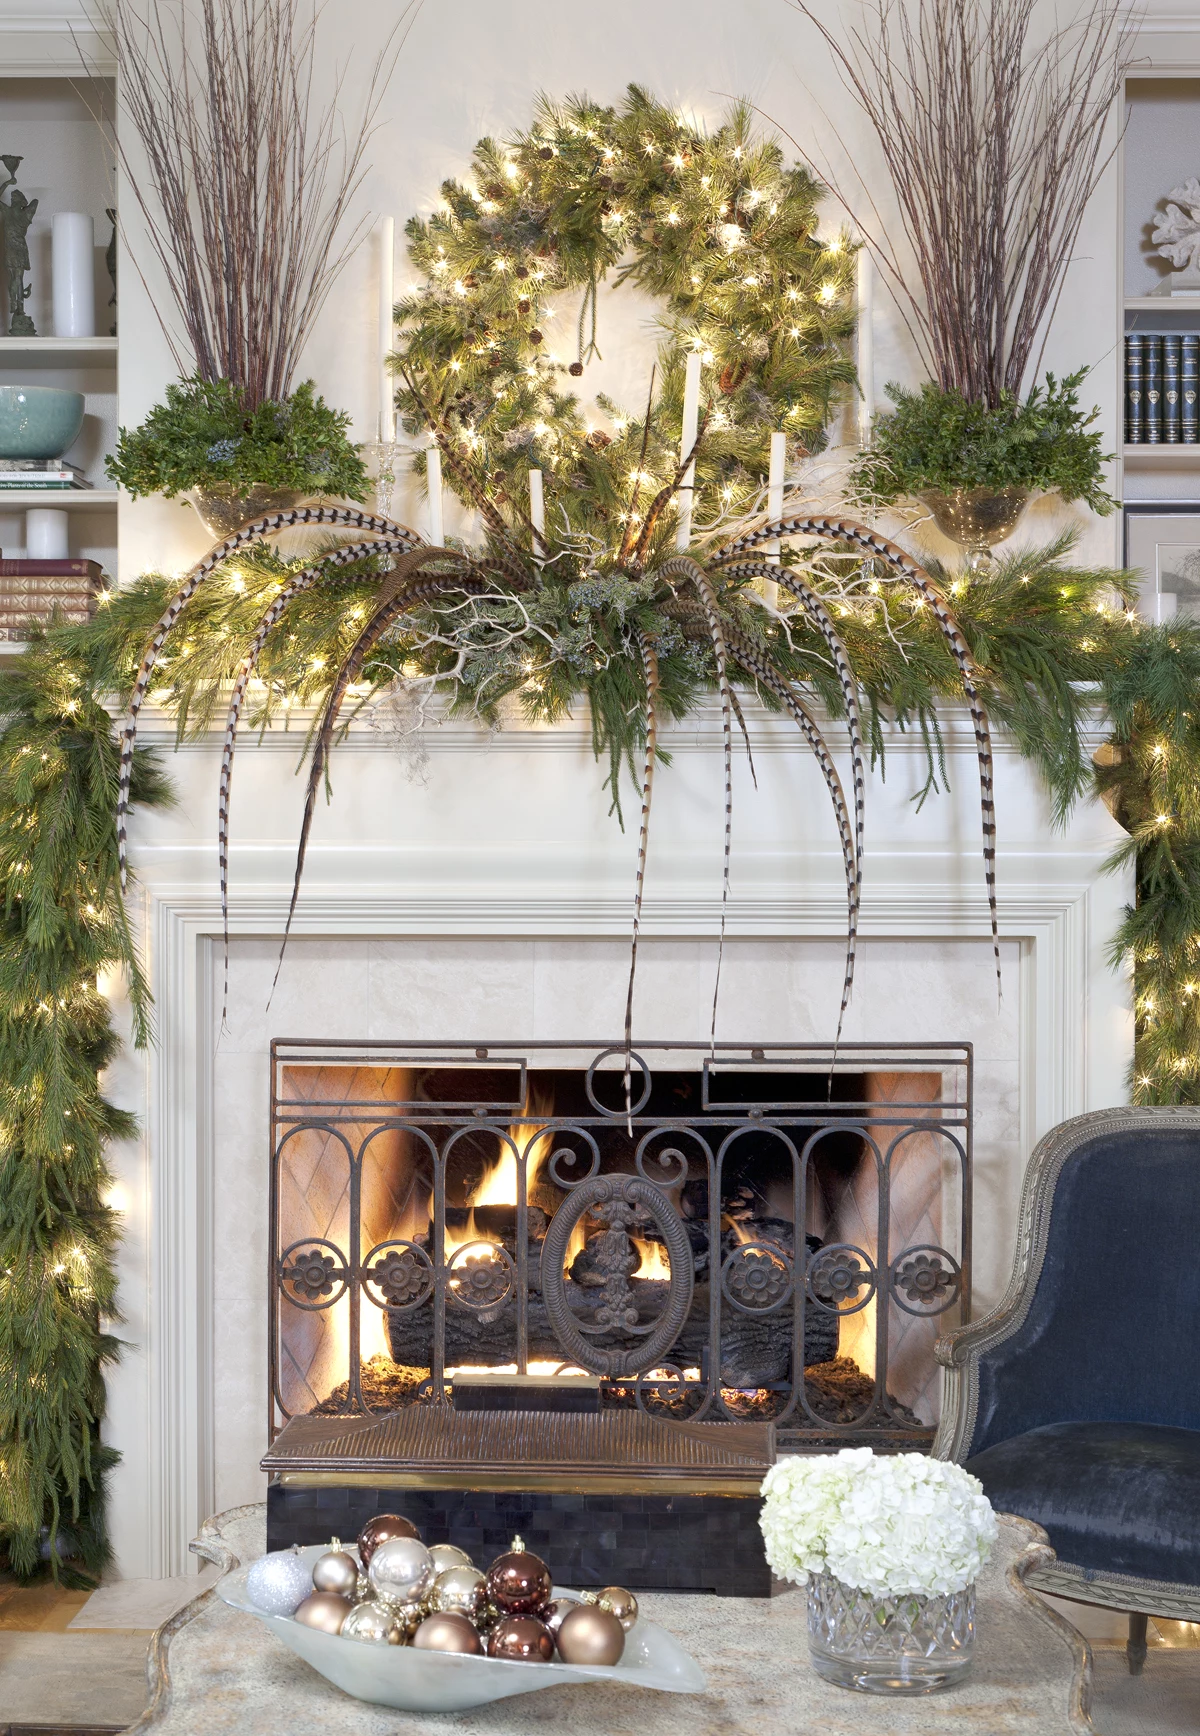 christmas mantel ideas, white lit fireplace, decorated with green pine garlands, a classic pine wreath, pheasant feathers and glowing string lights